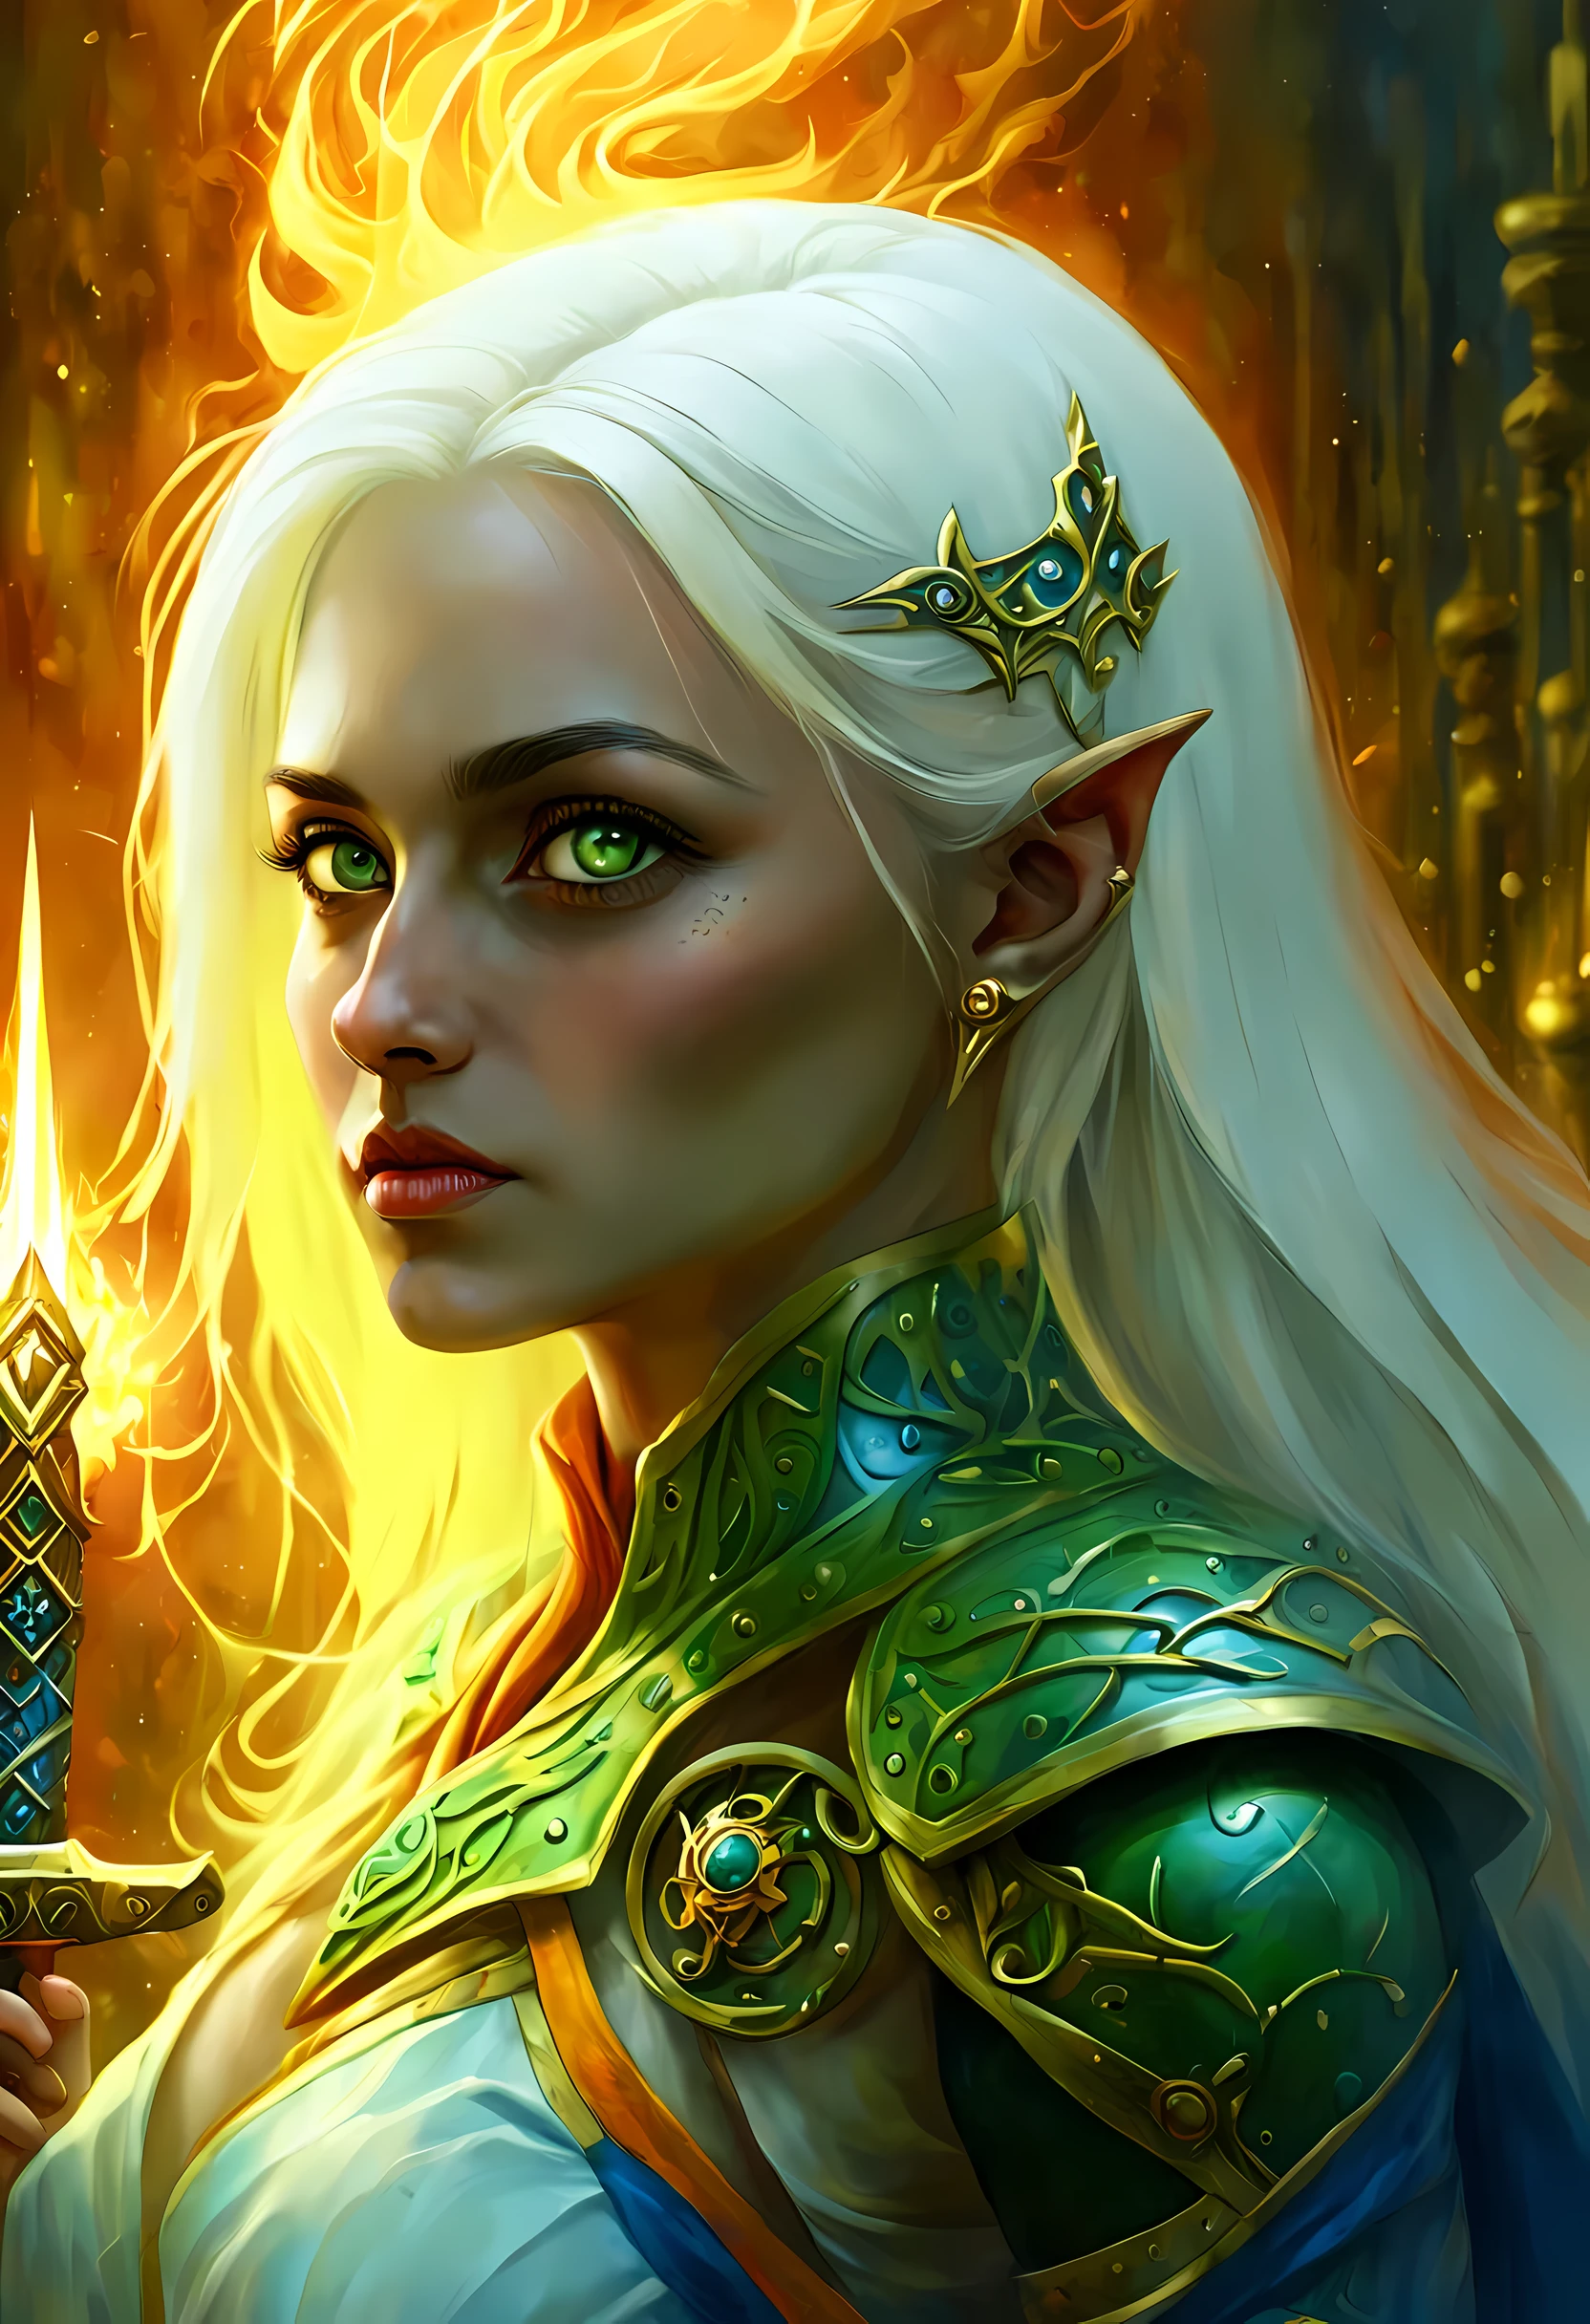 fAntAsy Art, dnd Art, RPG Art, Weitwinkelaufnahme, (mAsterpiece: 1.4) A (portrAit: 1.3) Intensiv detAils, highly detAiled, photoreAlistic, best quAlity, highres, GlühendeRunenAI_Gelb, portrAit A femAle (fAntAsy Art, MAsterpiece, best quAlity: 1.3) bl3uprint (Blau skin: 1.5, Intensiv detAils fAciAl detAils, exquisite beAuty, (fAntAsy Art, MAsterpiece, best quAlity) Kleriker, (Blau: 1.3) skinned femAle, (Weiß hAir: 1.3), long hAir, Intensiv (Grün: 1.3) Auge, fAntAsy Art, MAsterpiece, best quAlity) Armed A fiery sword red fire, weAring heAvy (Weiß: 1.3) hAlf plAte mAil Armor, weAring high heeled lAced boots, weAring An(orAnge :1.3) cloAk, weAring glowing holy symbol GlowingRunes_Gelb, within fAntAsy temple bAckground, Reflexionslicht, high detAils, best quAlity, 16k, [ultrA detAiled], mAsterpiece, best quAlity, (extremely detAiled), Nahaufnahme, ultrA Weitwinkelaufnahme, photoreAlistic, roh, fAntAsy Art, dnd Art, fAntAsy Art, reAlistic Art,((best quAlity)), ((mAsterpiece)), (detAiled), perfect fAce, ((no eArs: 1.6))